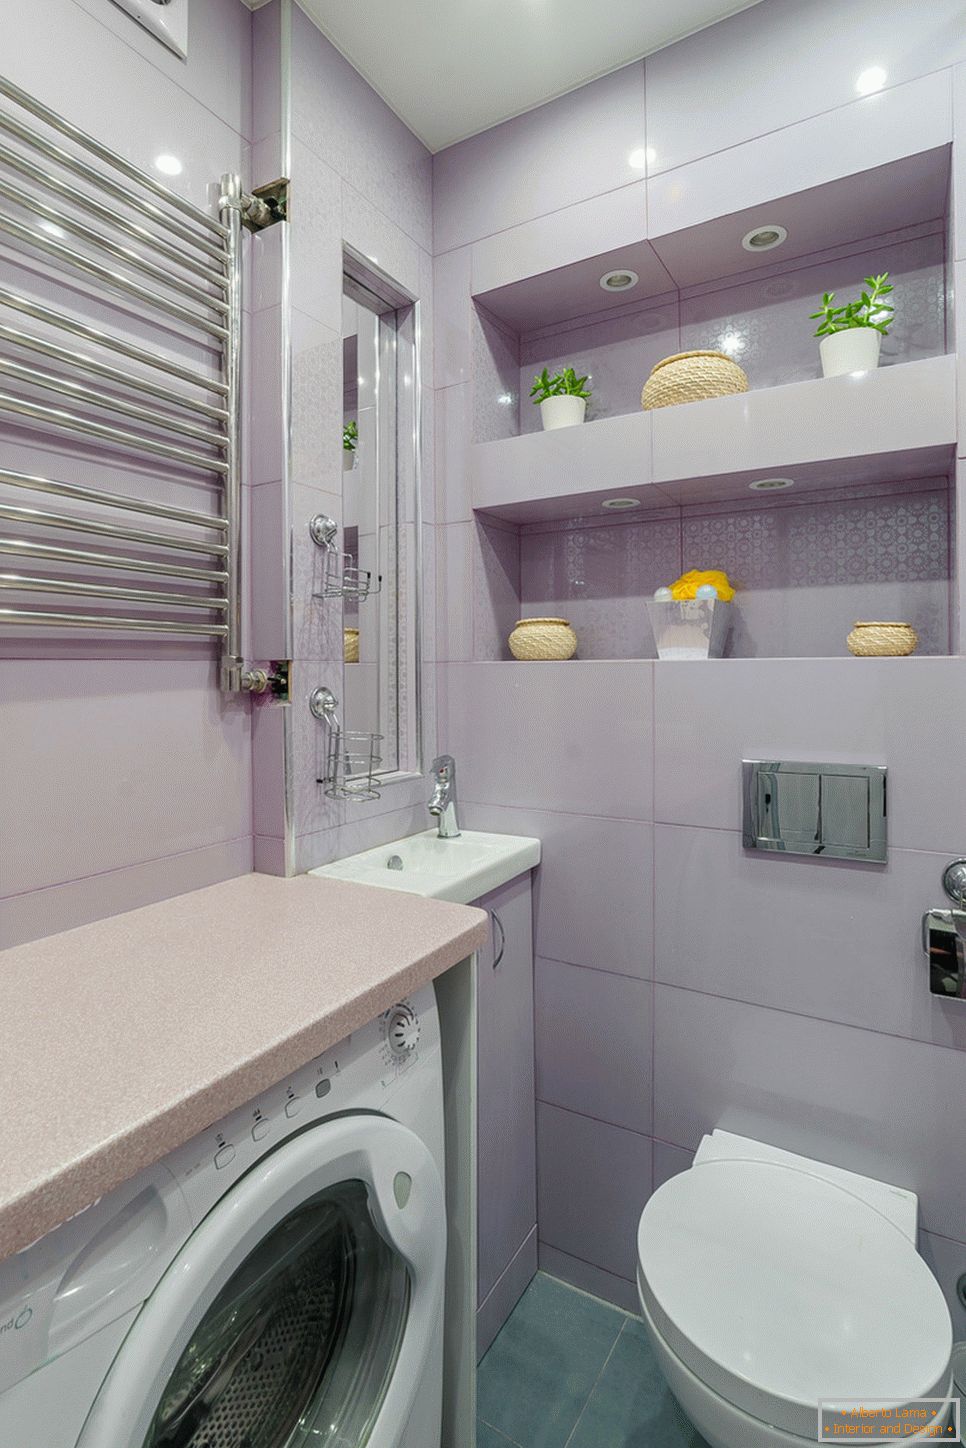 Lilac tile in the bathroom decoration